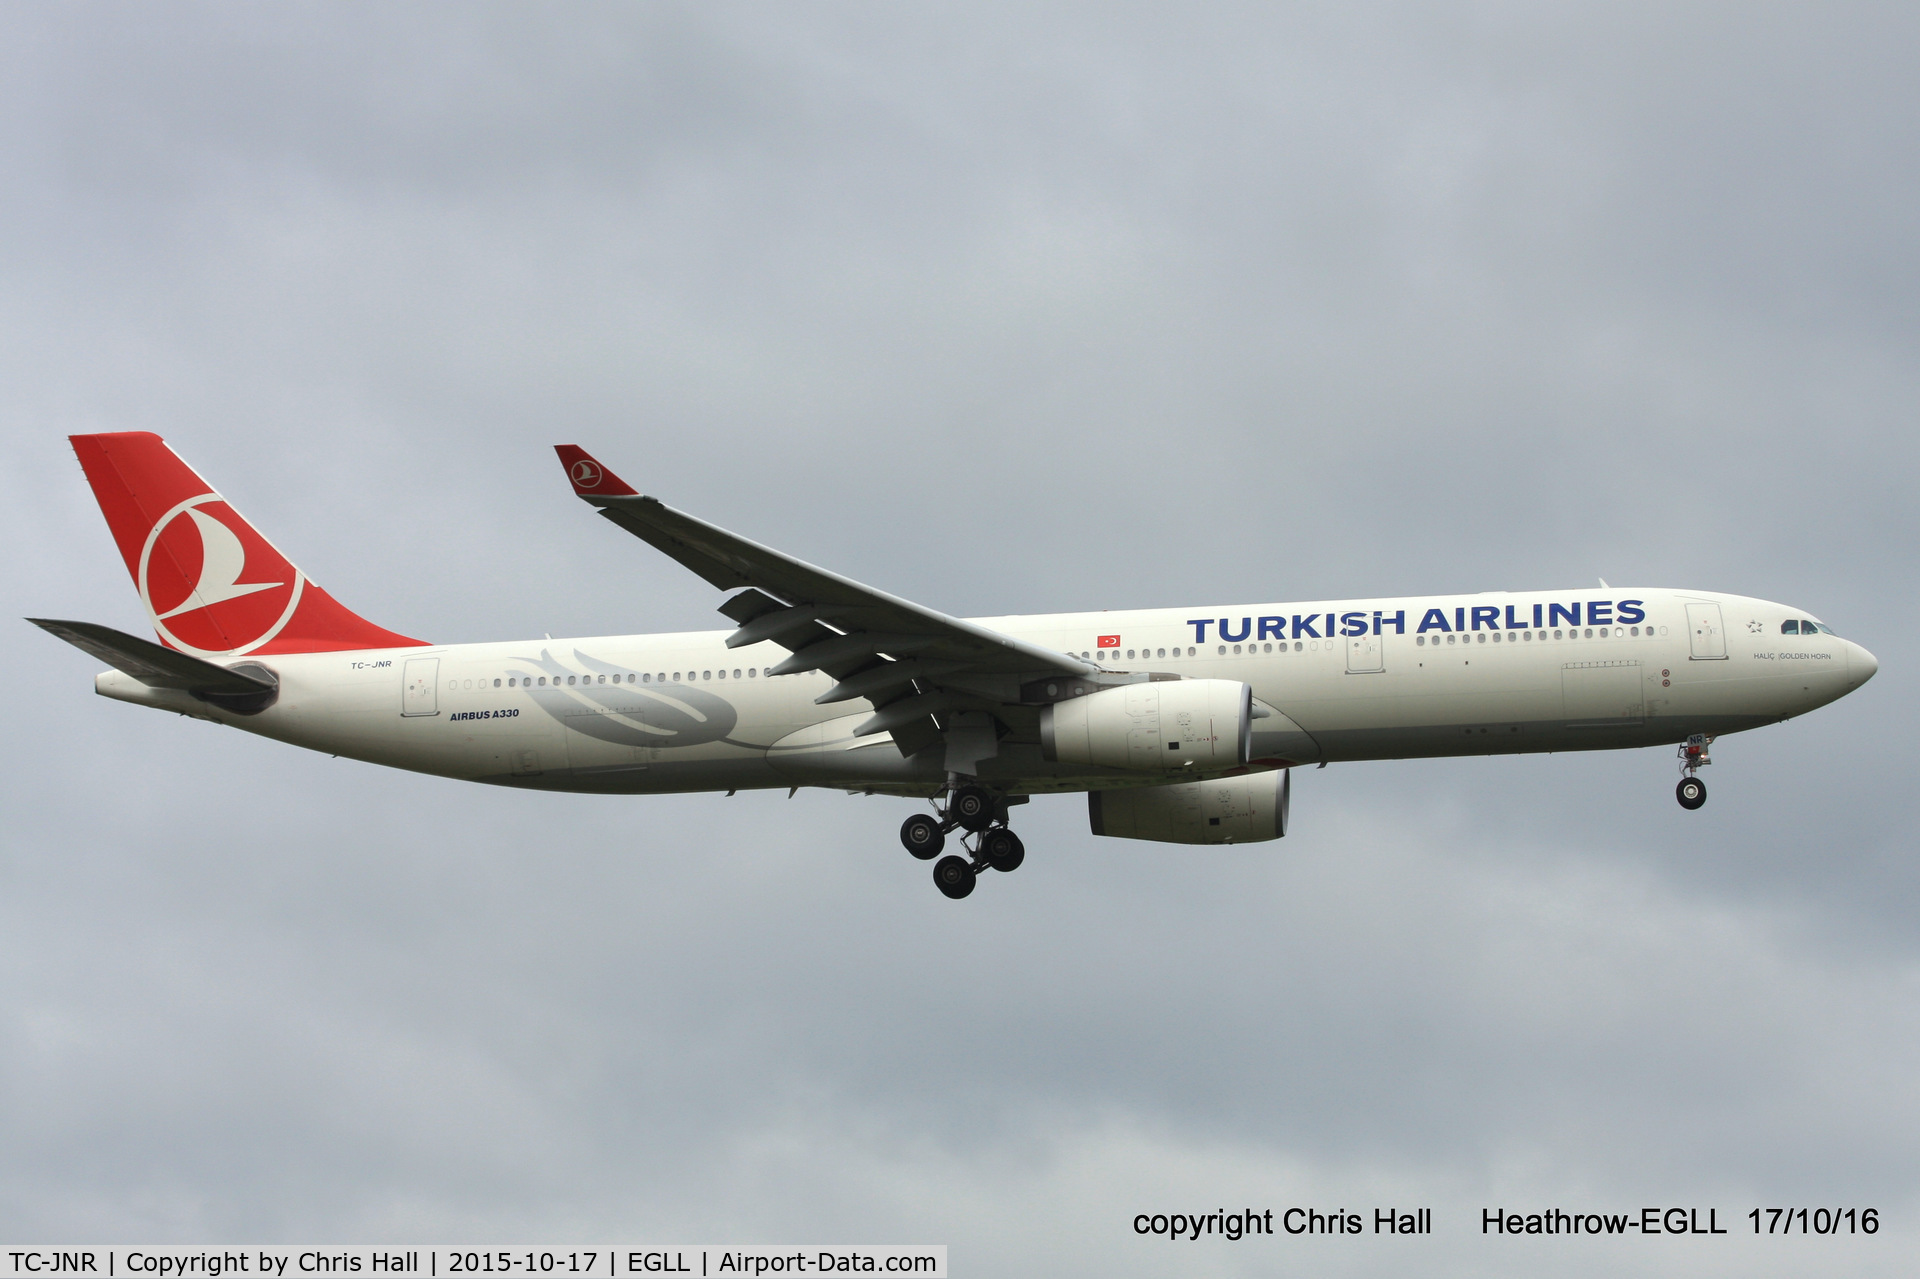 TC-JNR, 2012 Airbus A330-343X C/N 1311, Turkish Airlines